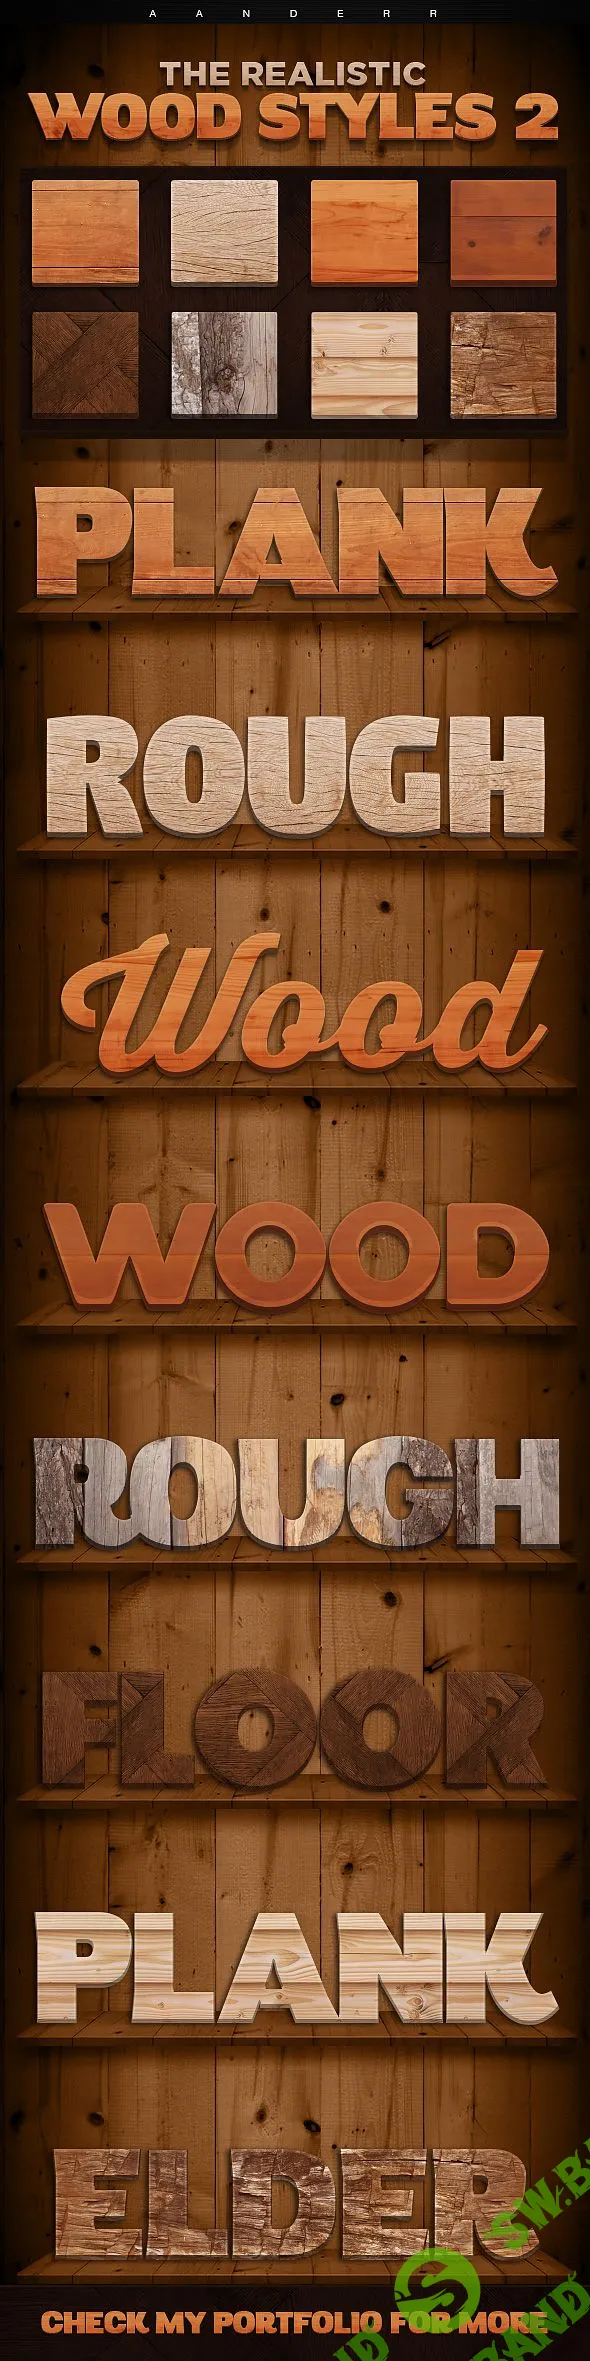 [Graphicriver] The Realistic Wood Styles 2 (2016)